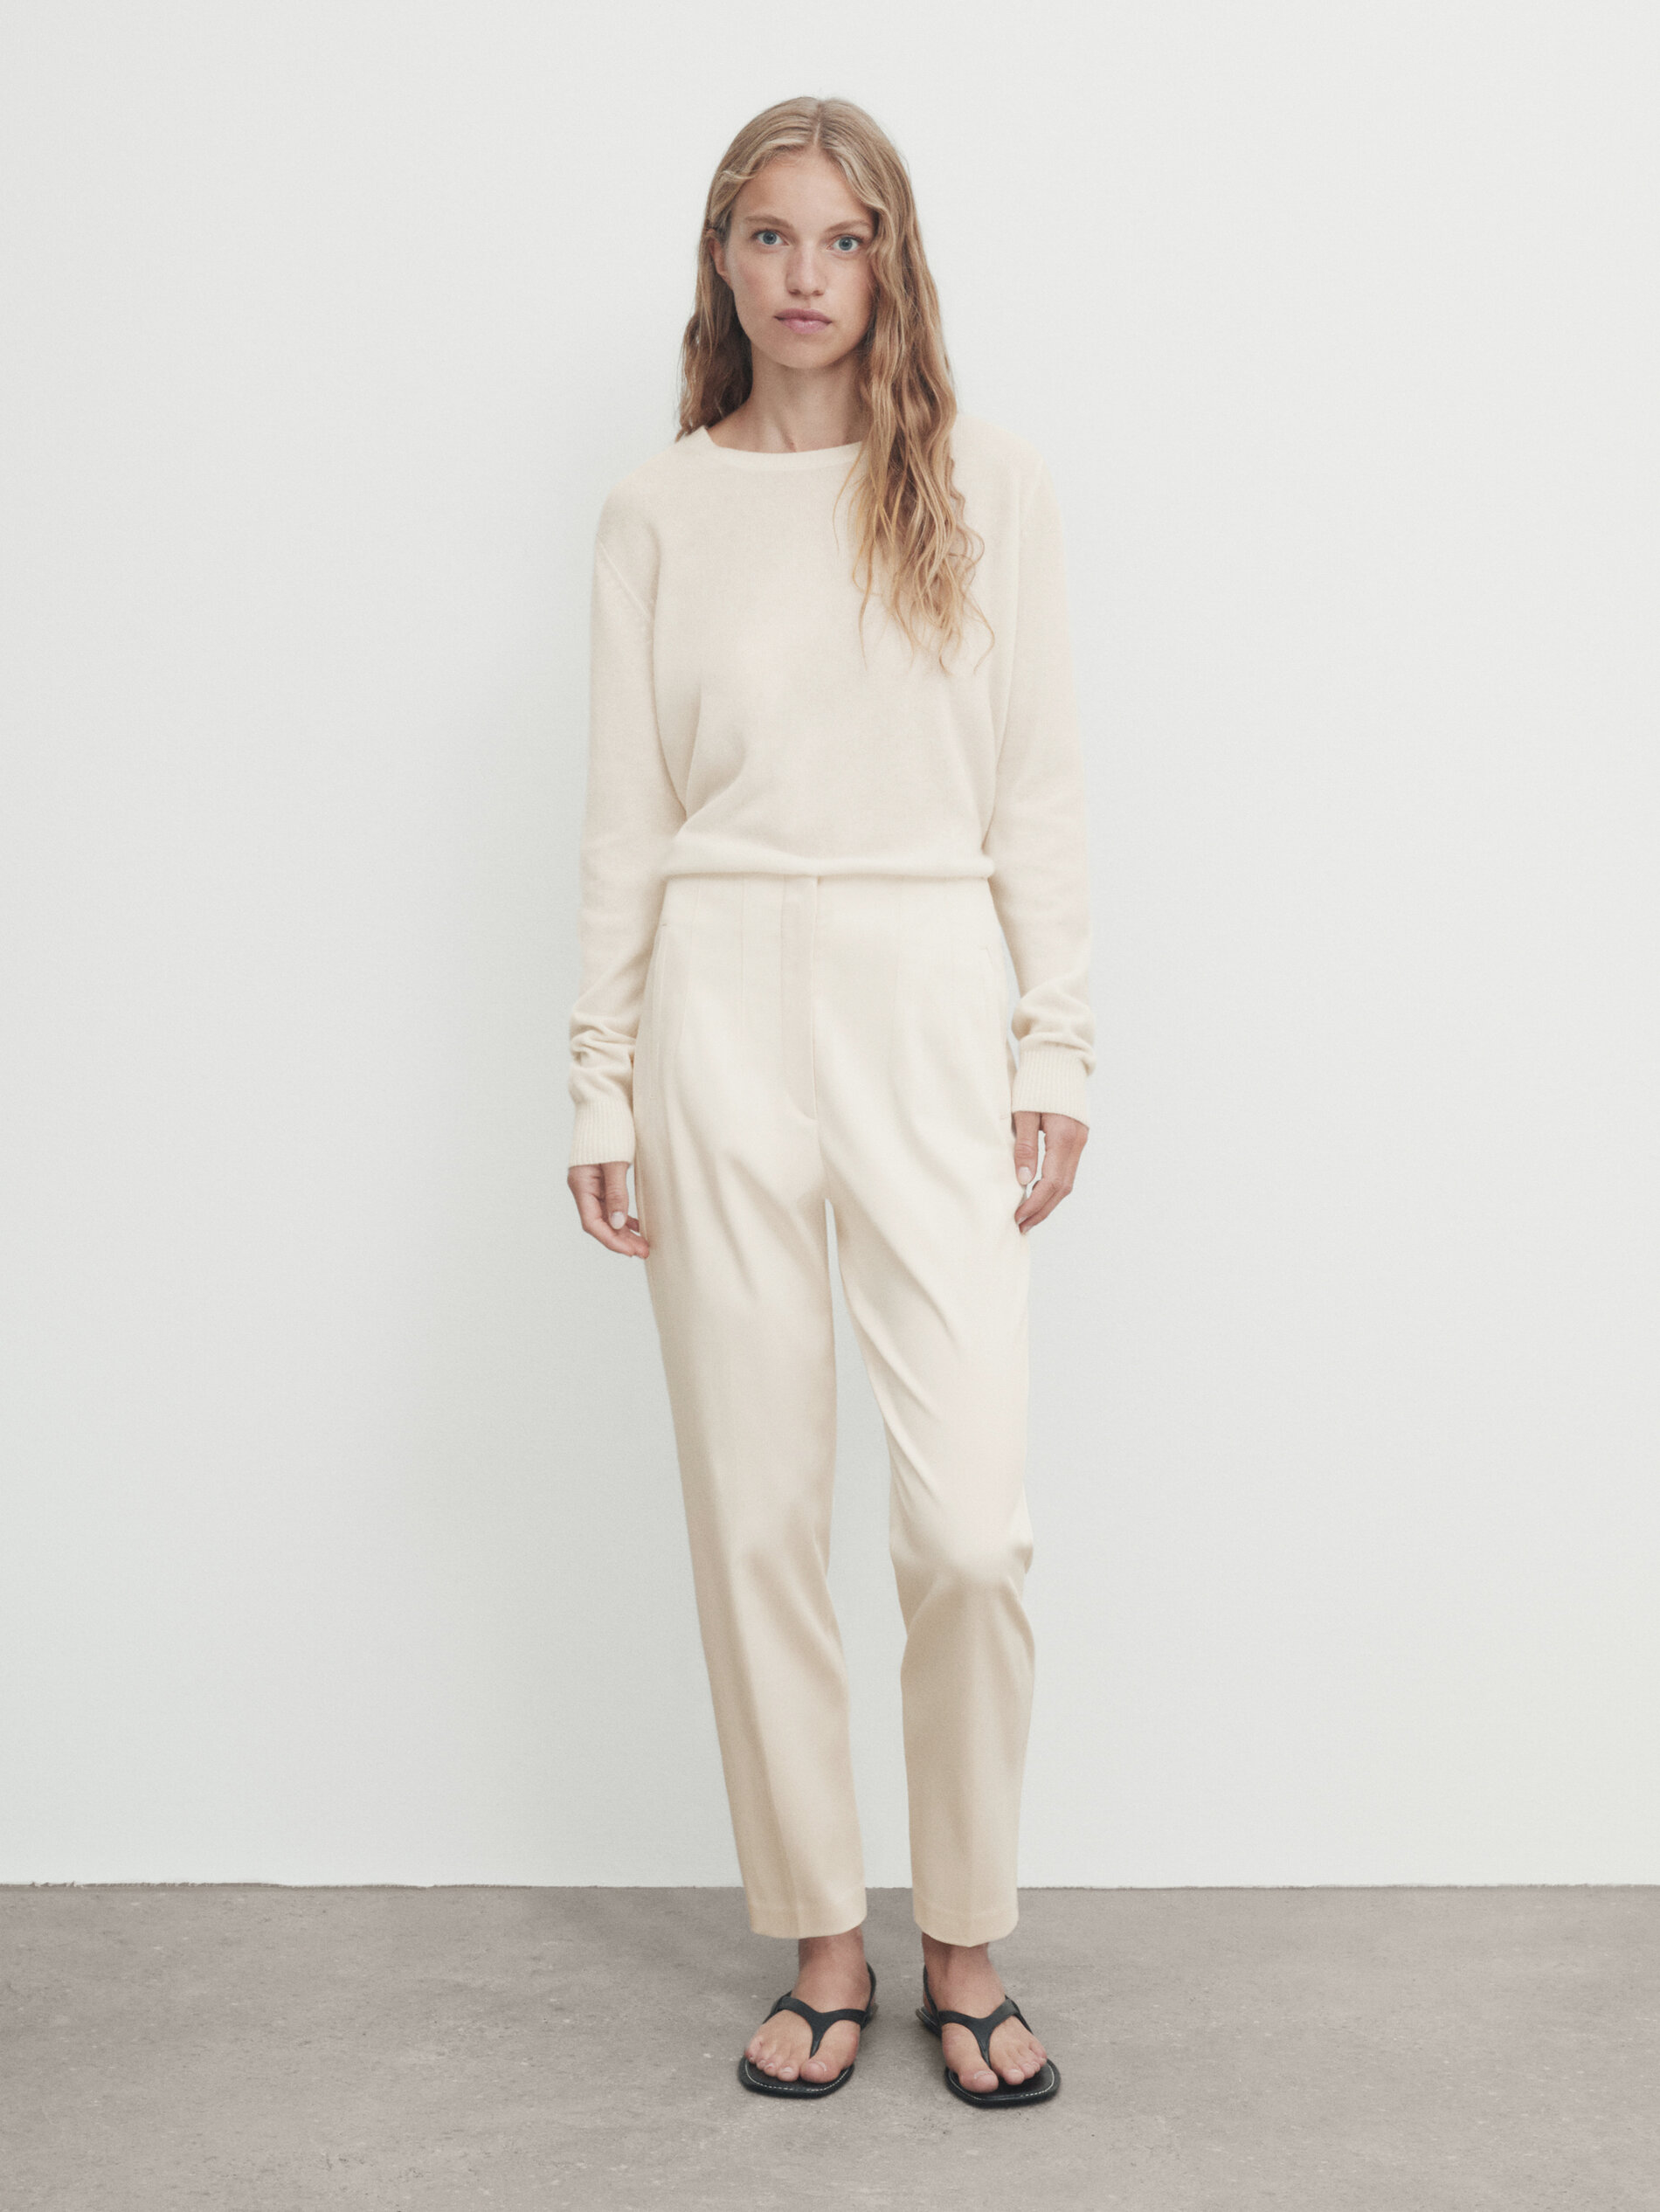 ASOS EDITION high waisted trouser in textured jersey in cream | ASOS